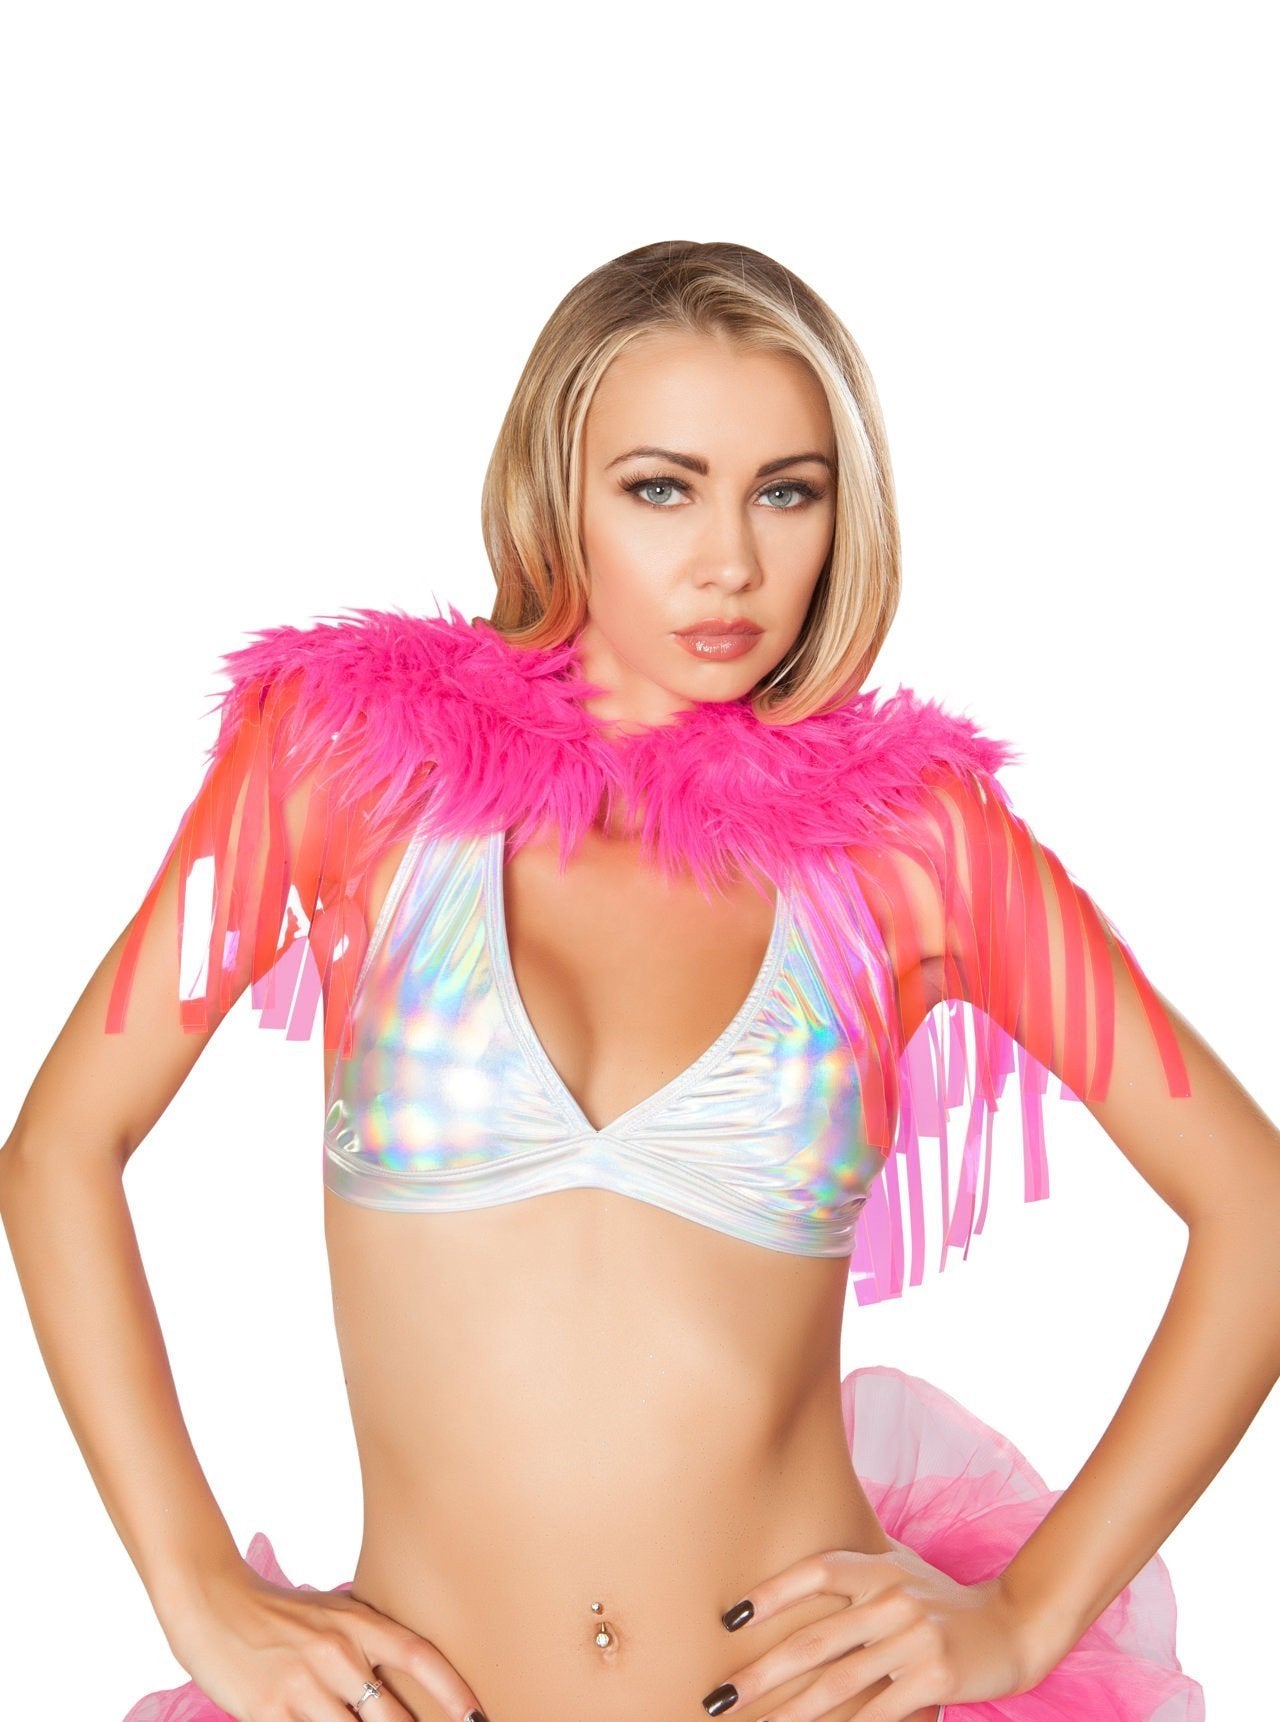 Buy Fringed Shrug with Fur Detail from RomaRetailShop for 28.50 with Same Day Shipping Designed by Roma Costume 3252-HP-O/S